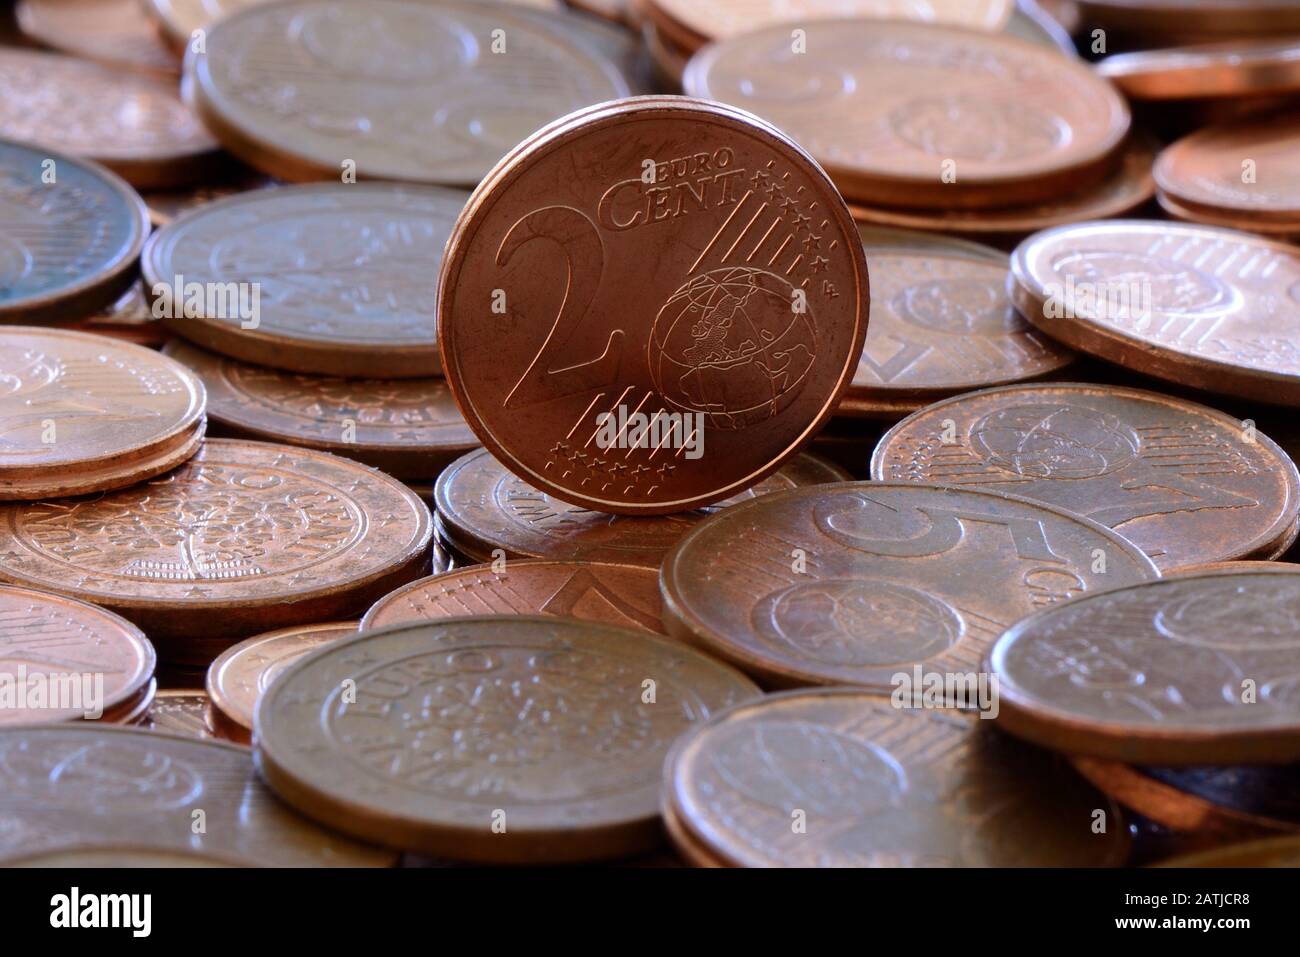 According to media reports, the new EU Commission chief Ursula von der Leyen plans to abolish all 1 and 2 cent coins. Stock Photo